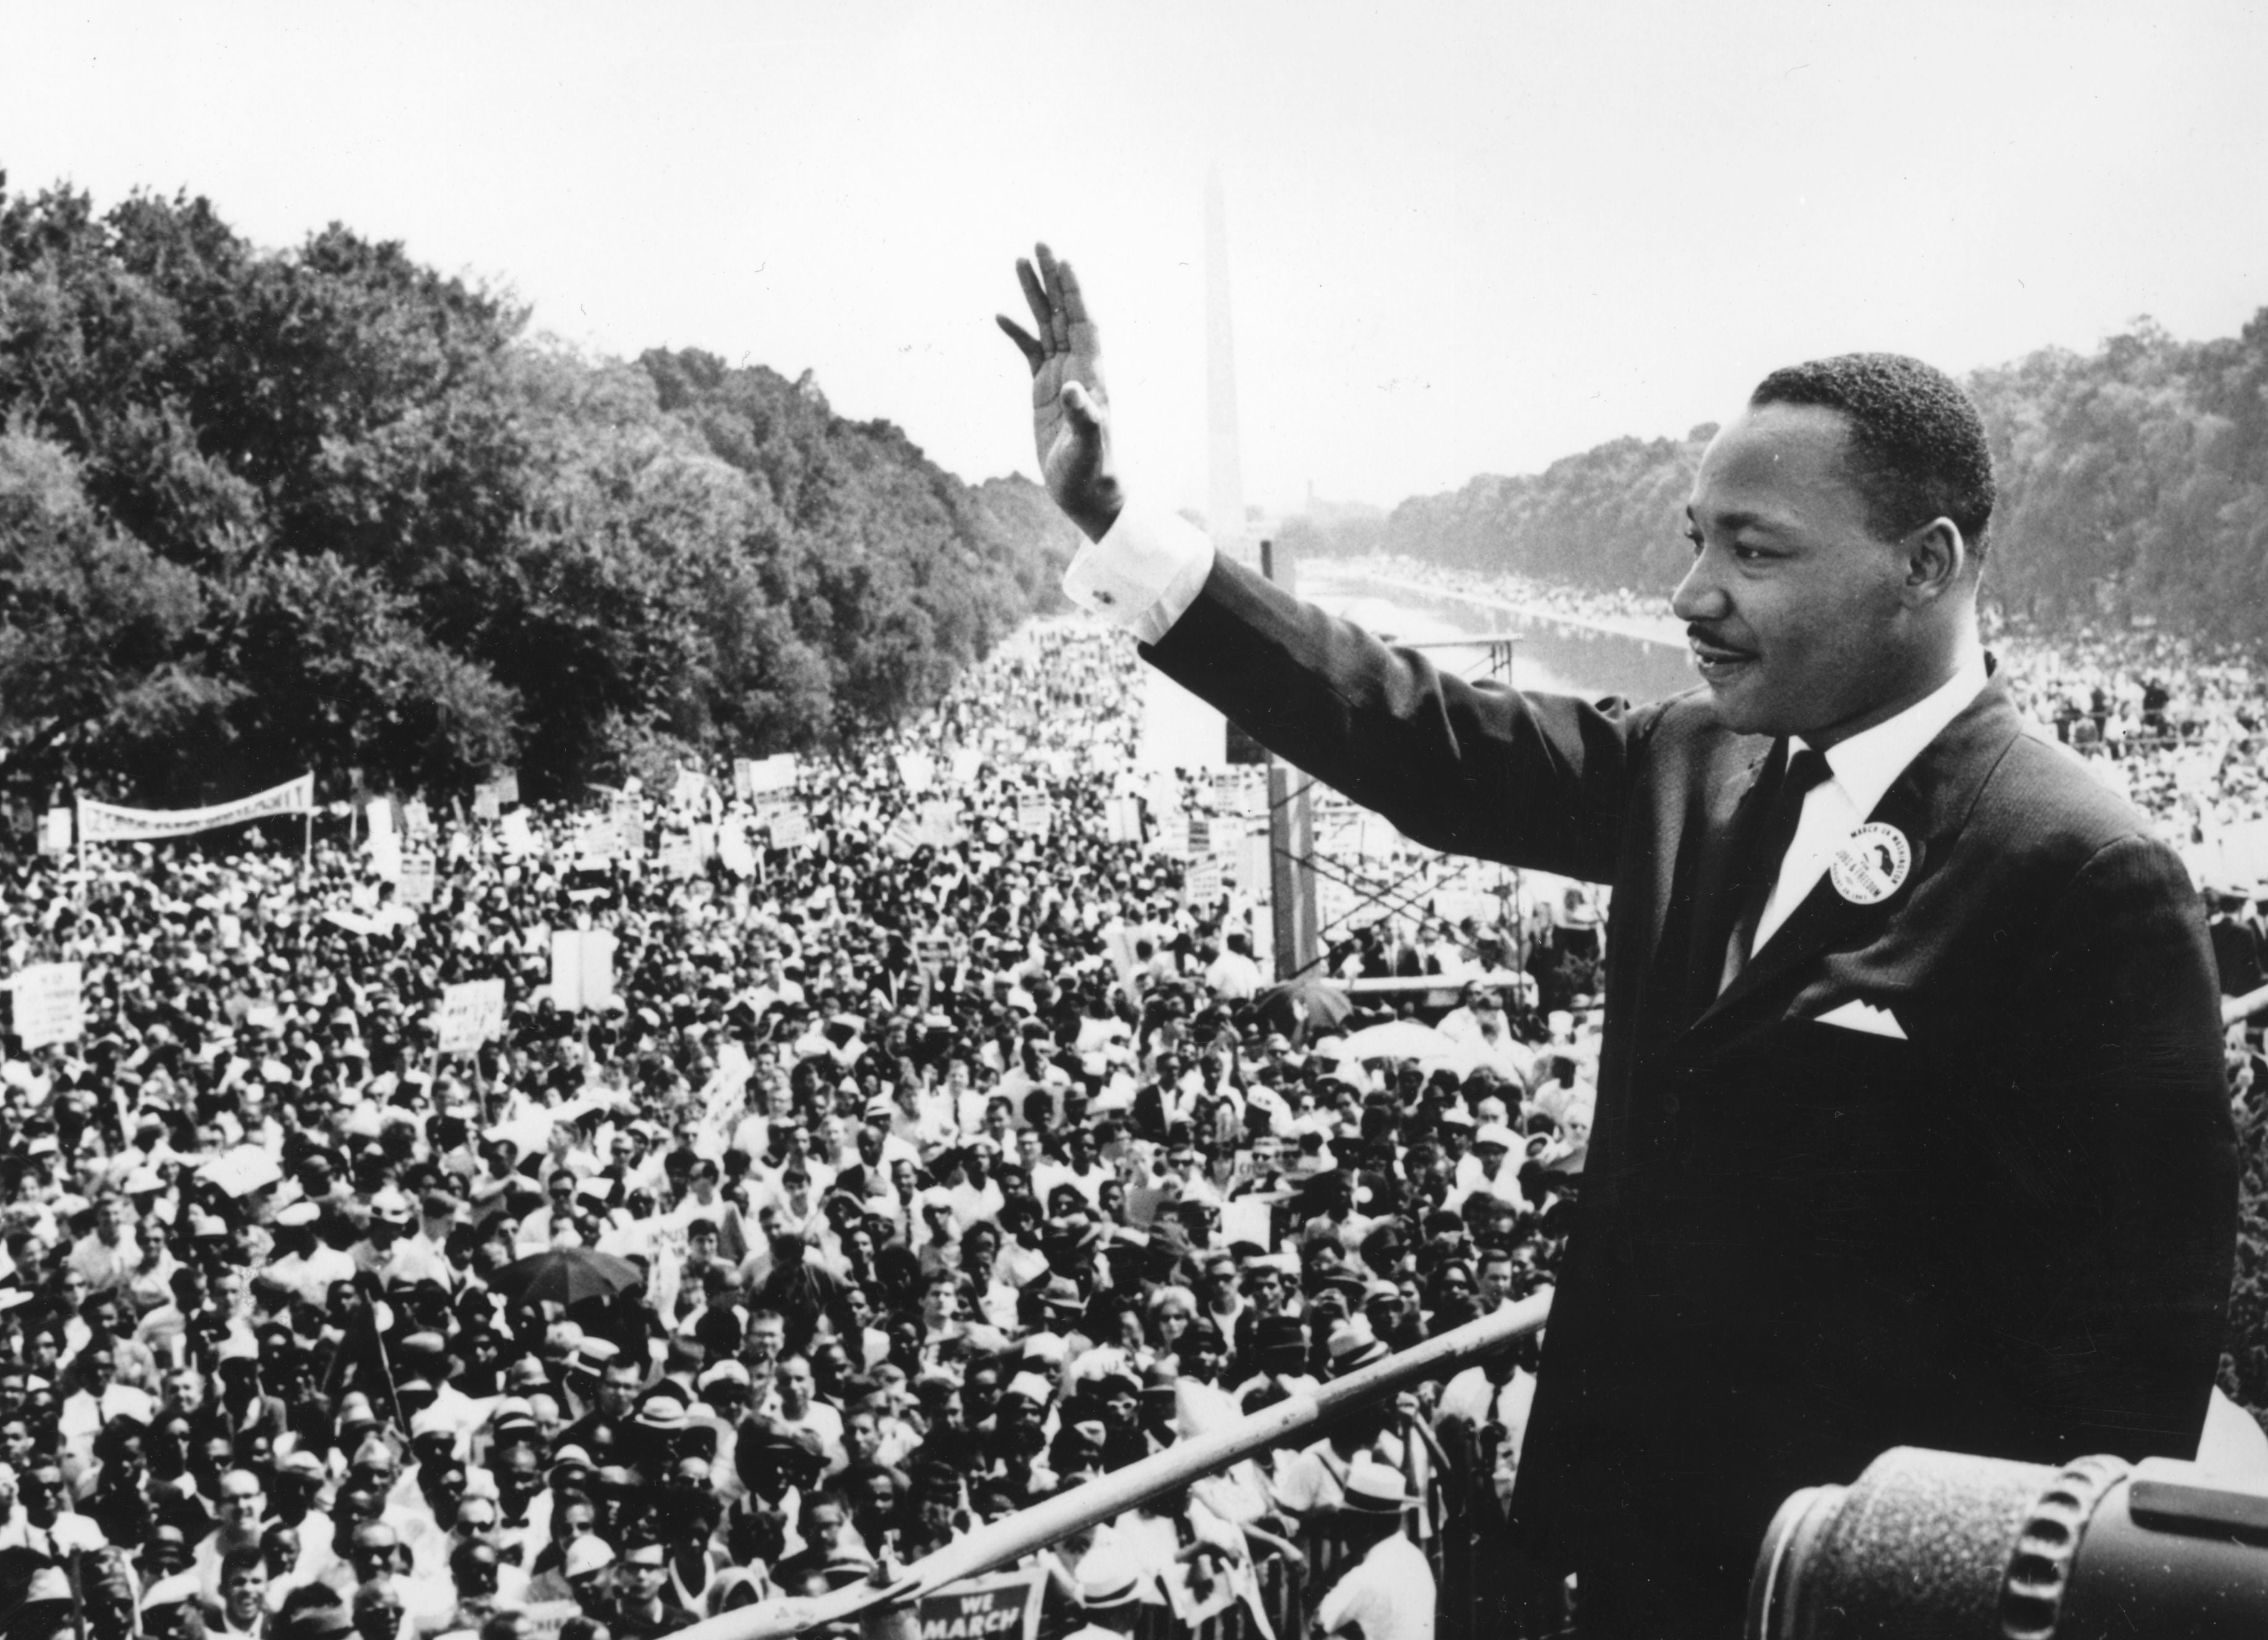 King gives his famous ‘I have a dream’ speech in 1963